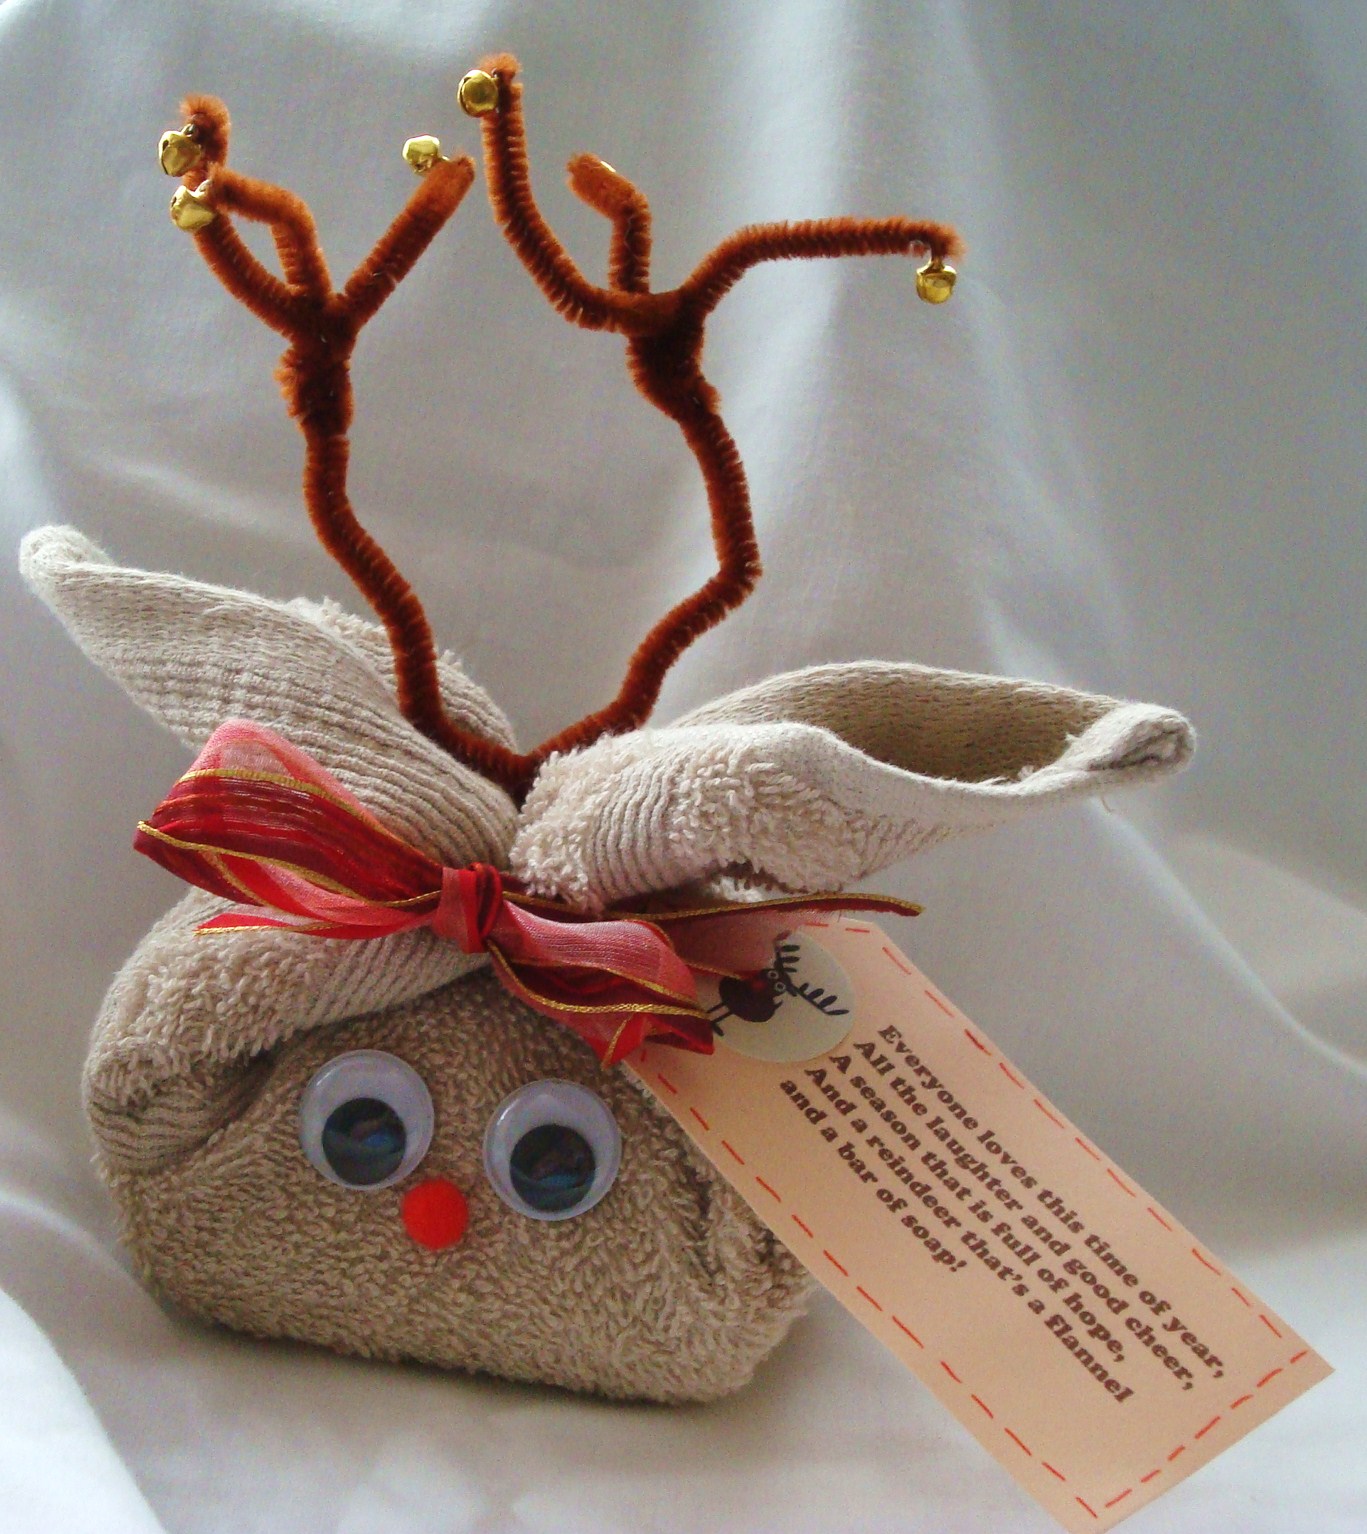 36 Quick Handmade Gift Ideas: Food, Crafts, Home, Family & Bath - An Oregon  Cottage